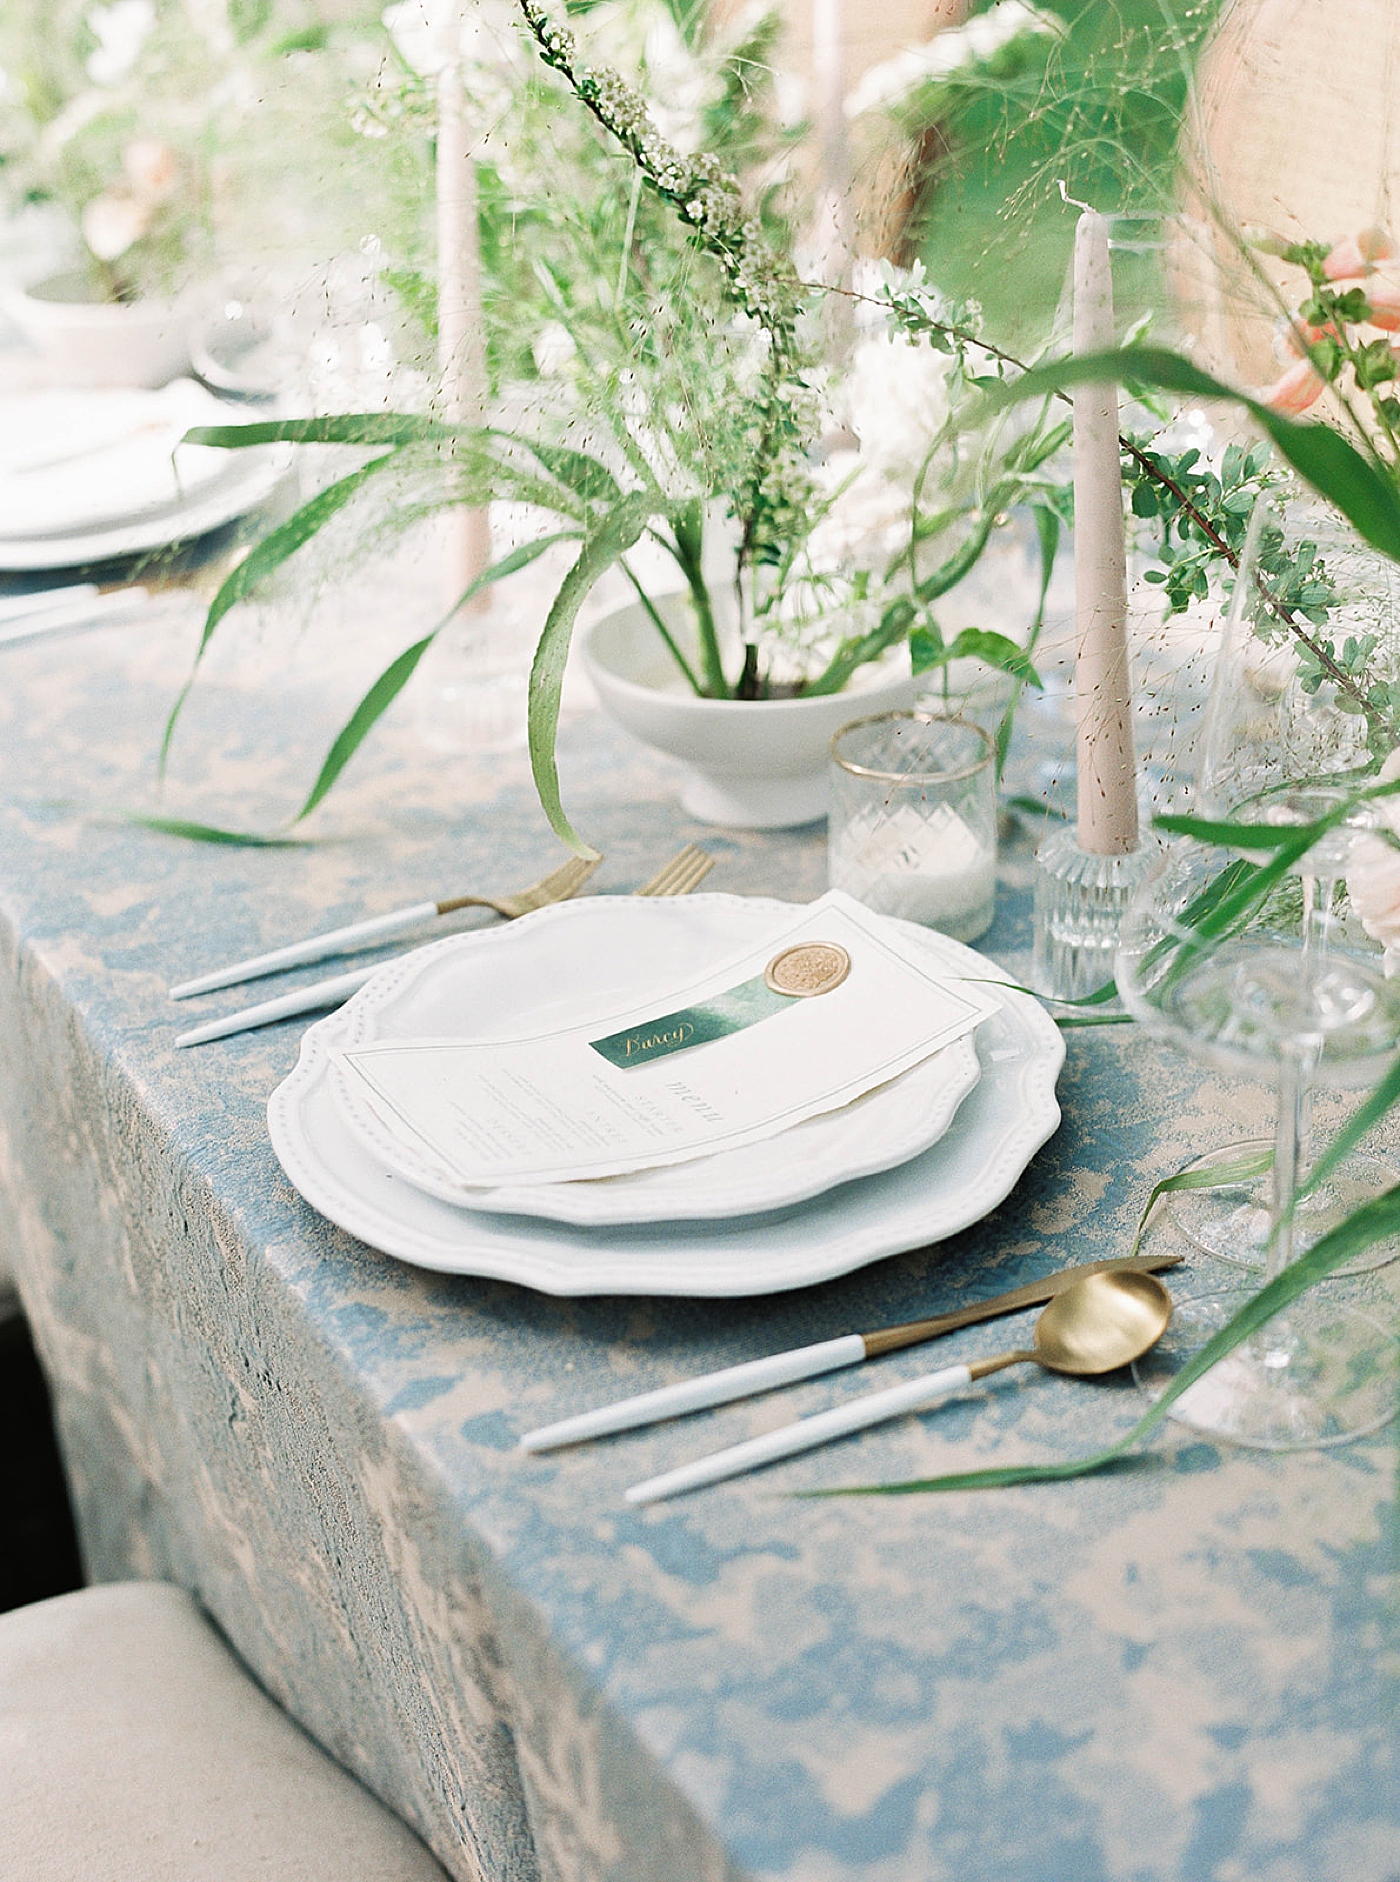 Reception details with place setting and greenery | Carters Event Co